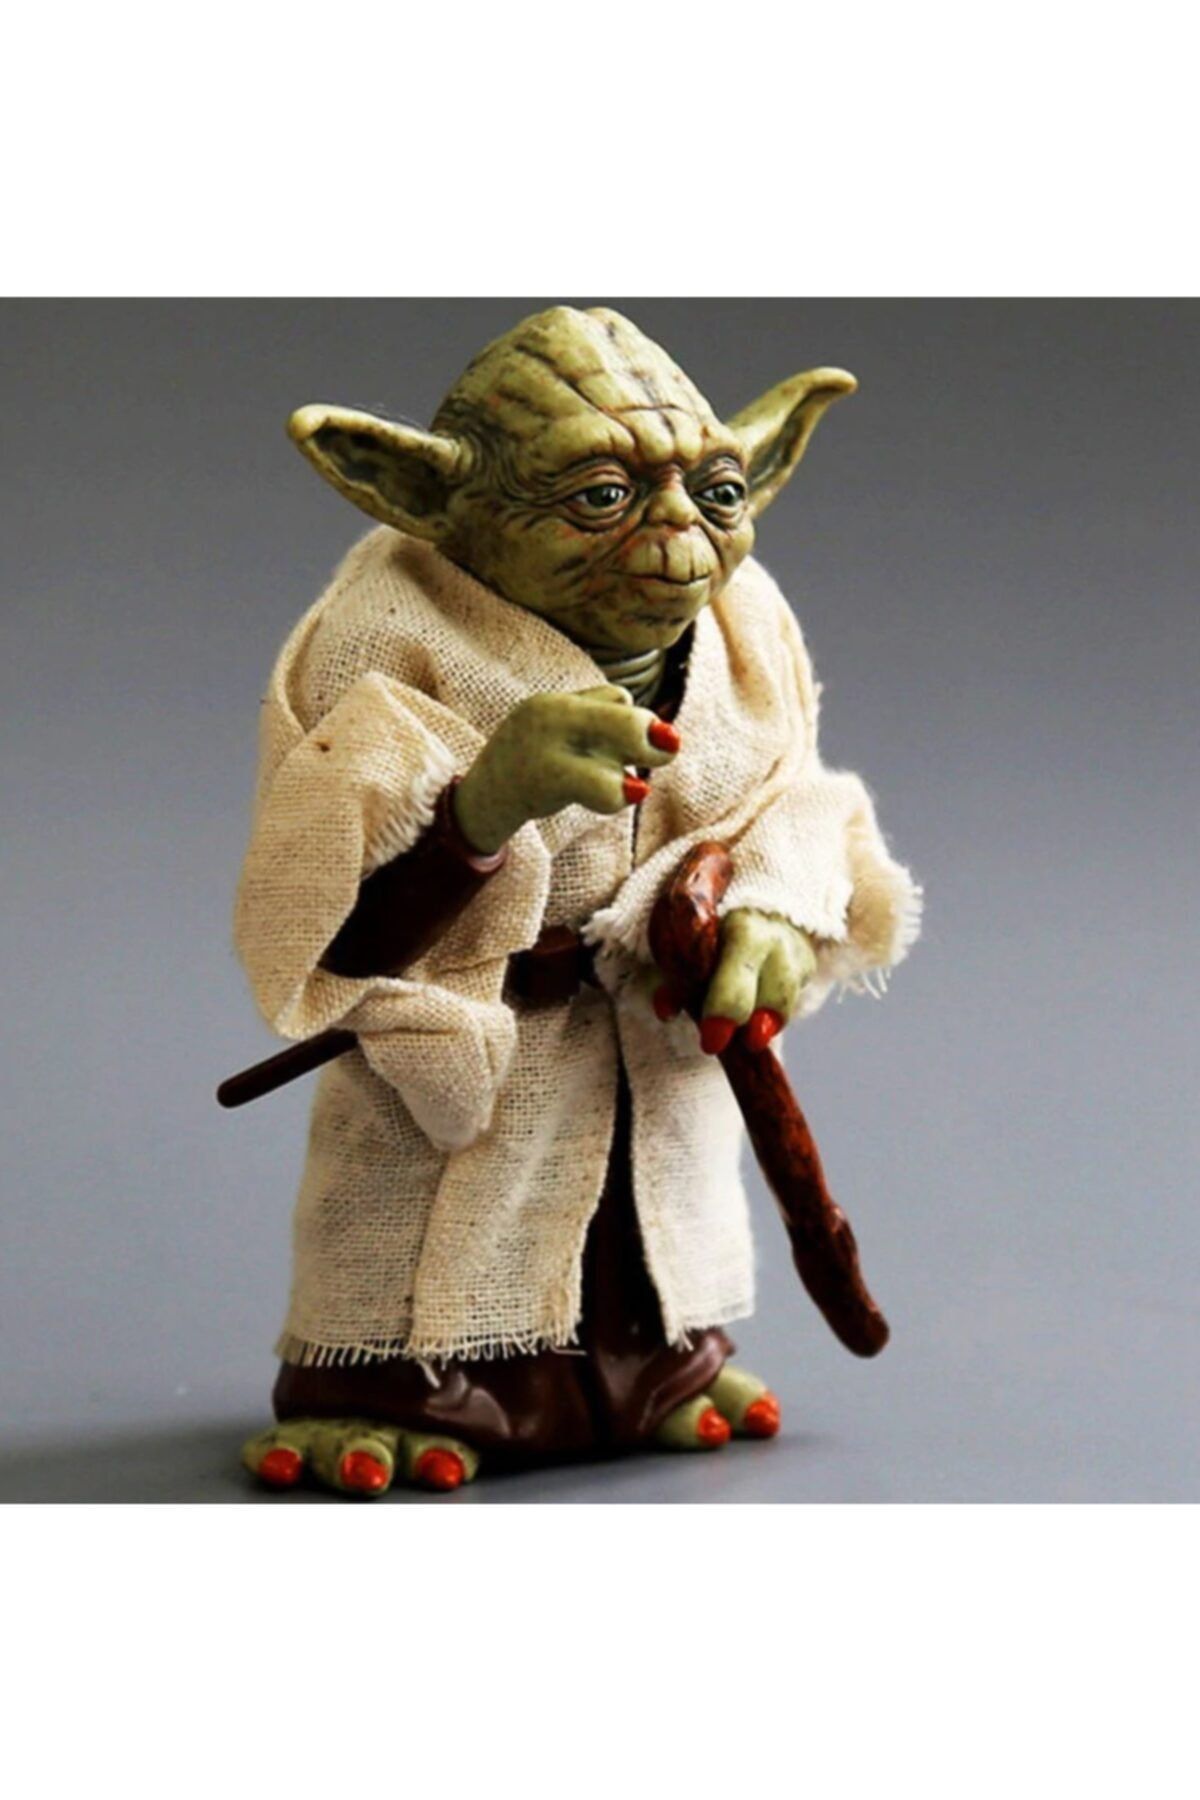 Cold Easy Star Wars Yoda Action Figure